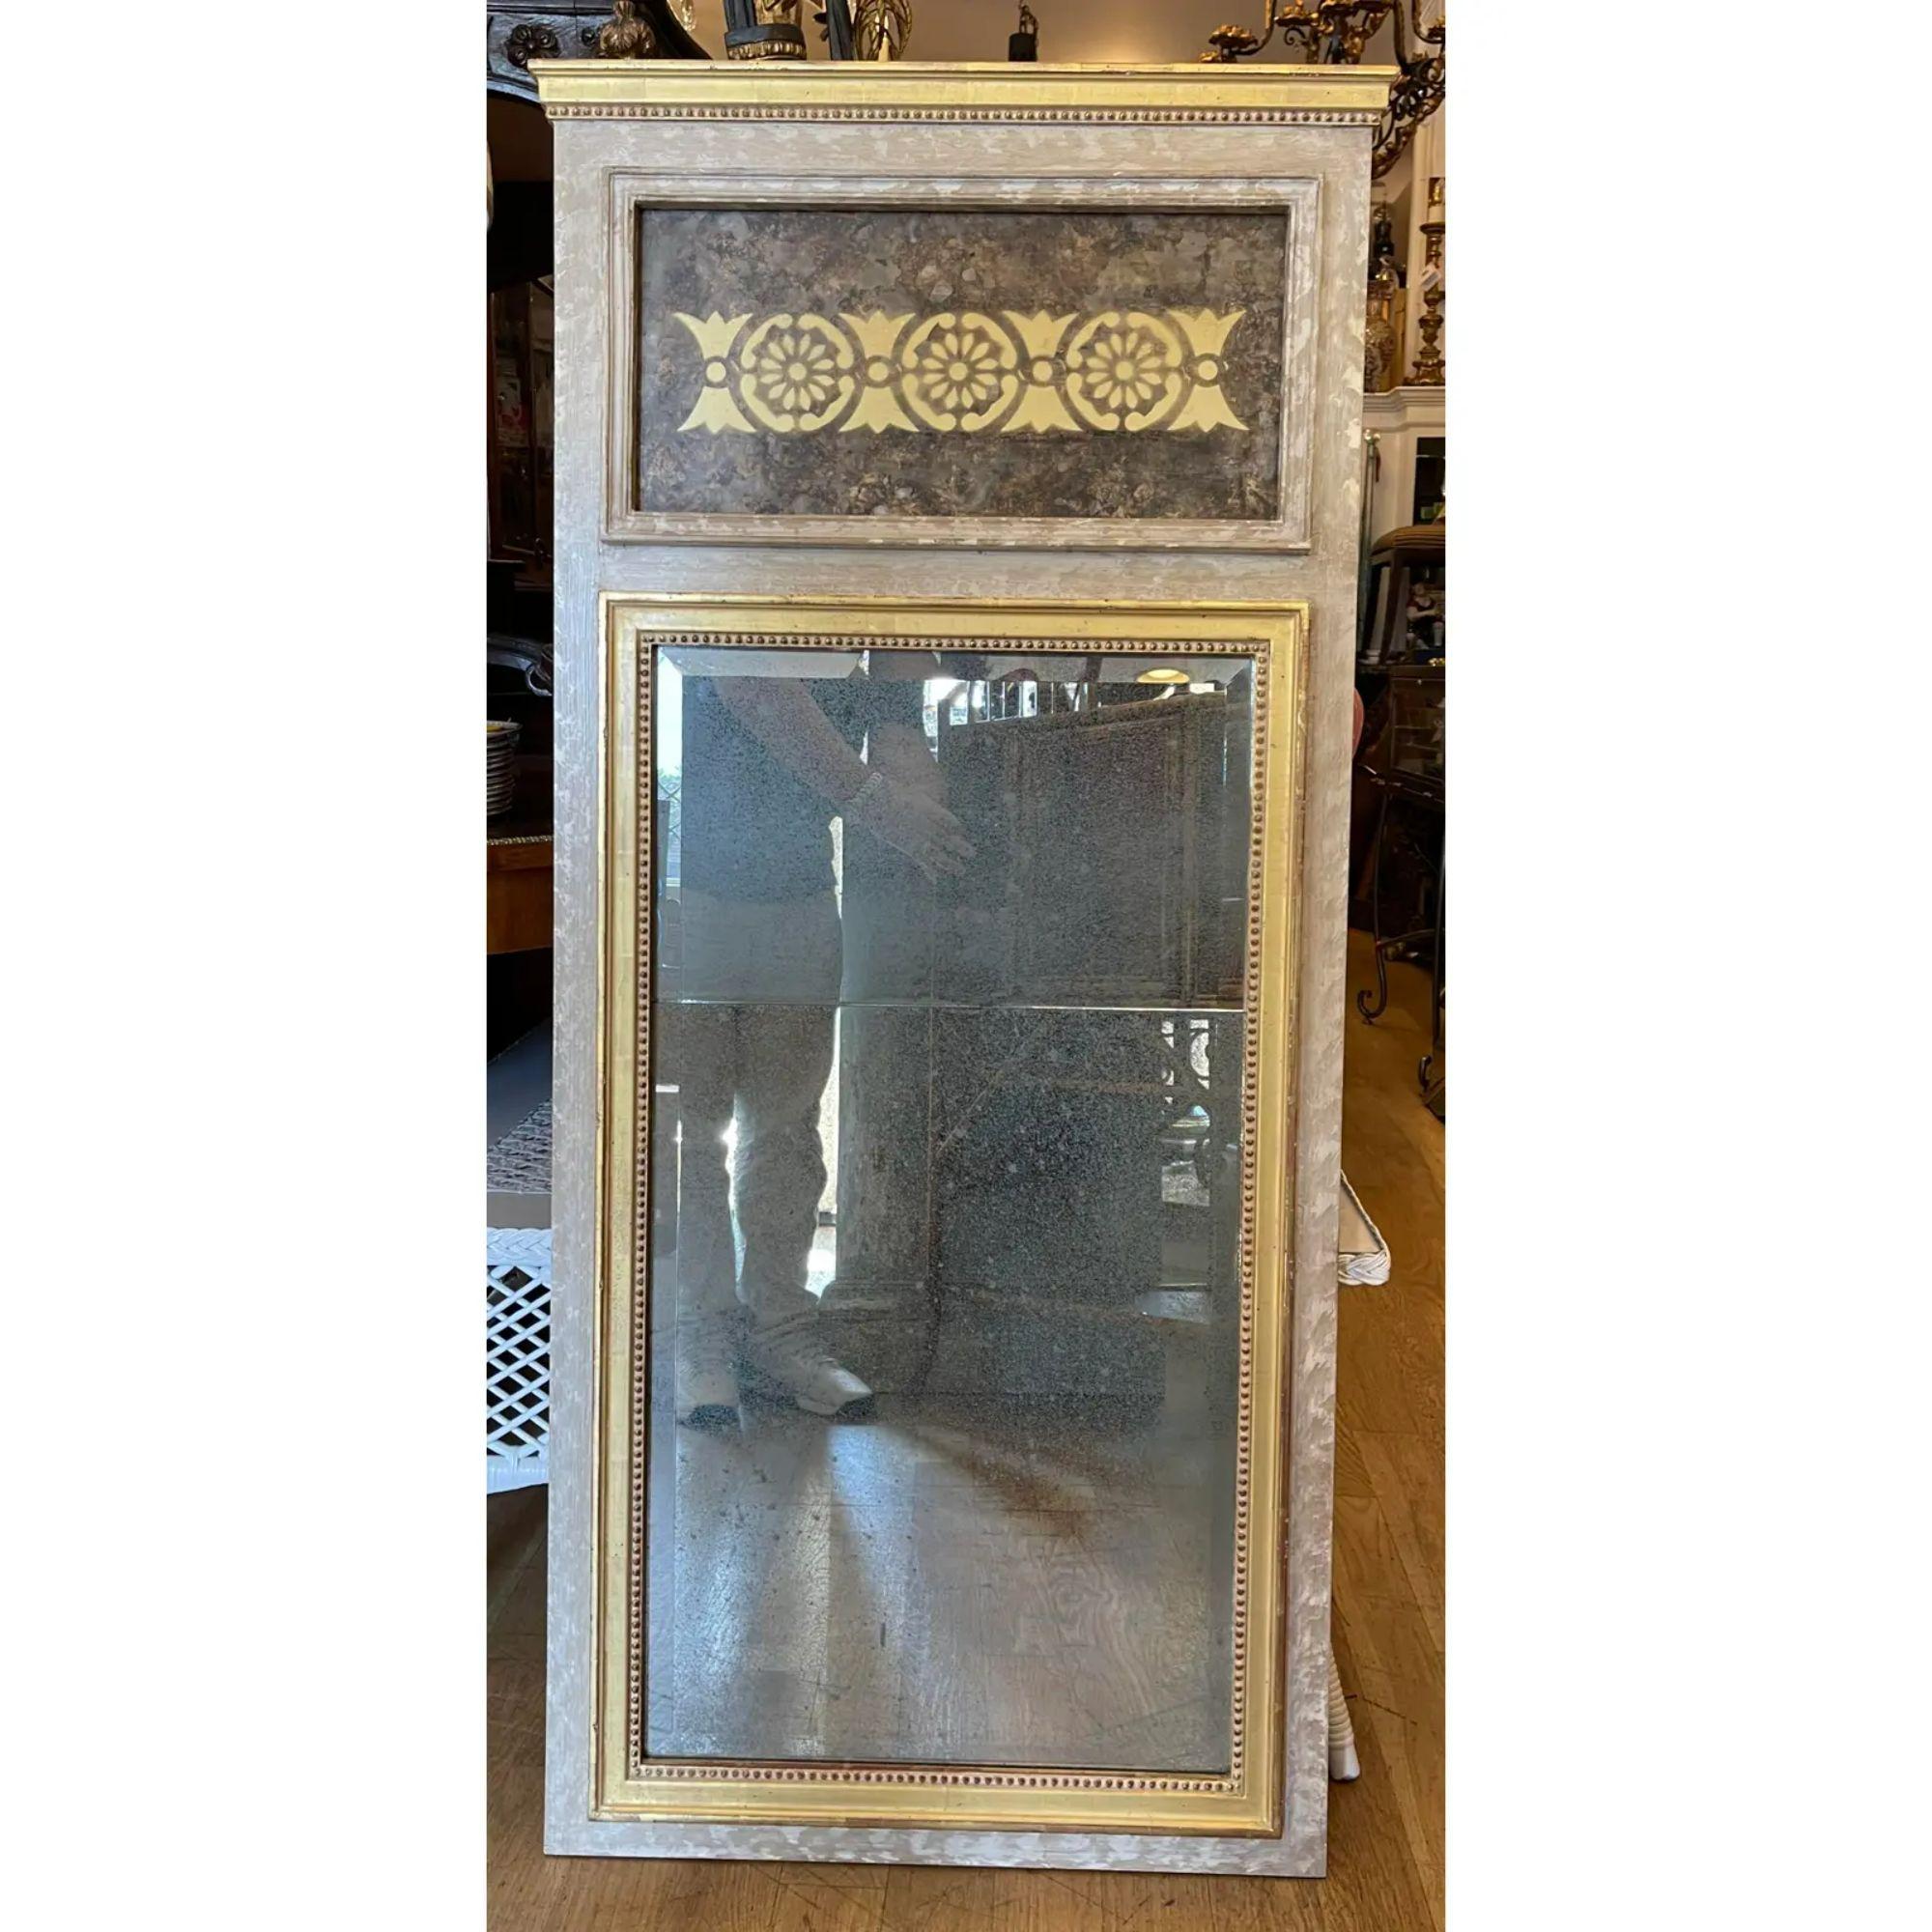 Neoclassical style giltwood Trumeau mirror. It features a modernized gilt stencil on a faux tortoise panel.

Additional information:
Materials: giltwood, mirror
Color: Gold
Period: 1990s
Styles: neoclassical
Item type: vintage, antique or